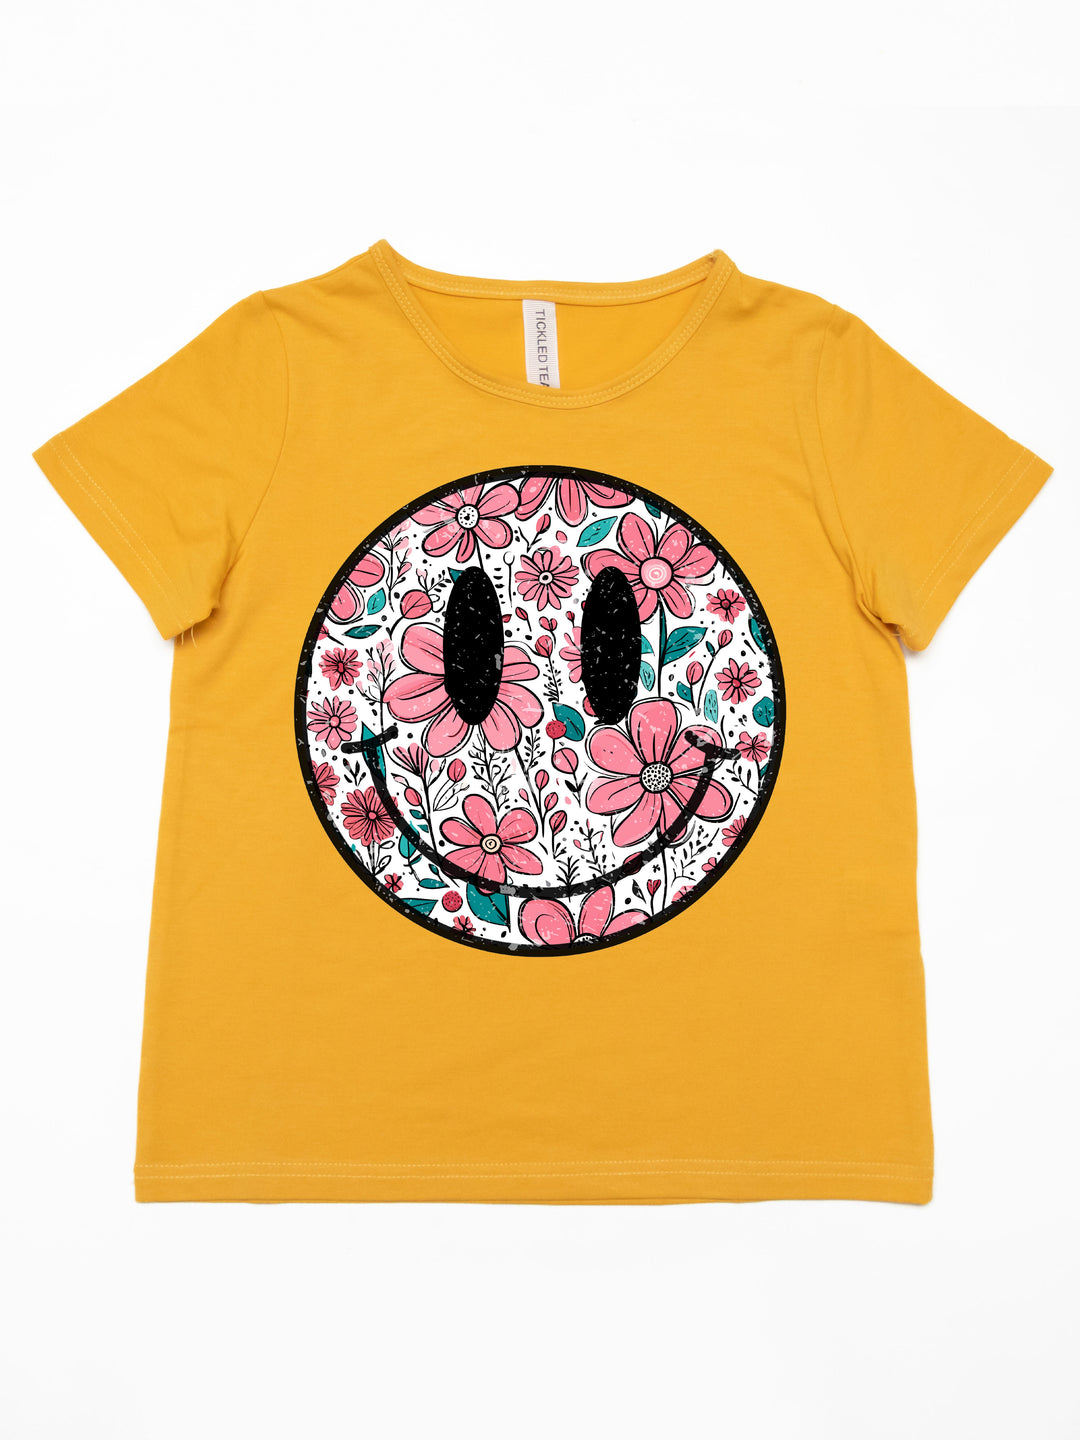 Floral Smiley - Kids Graphic Tee